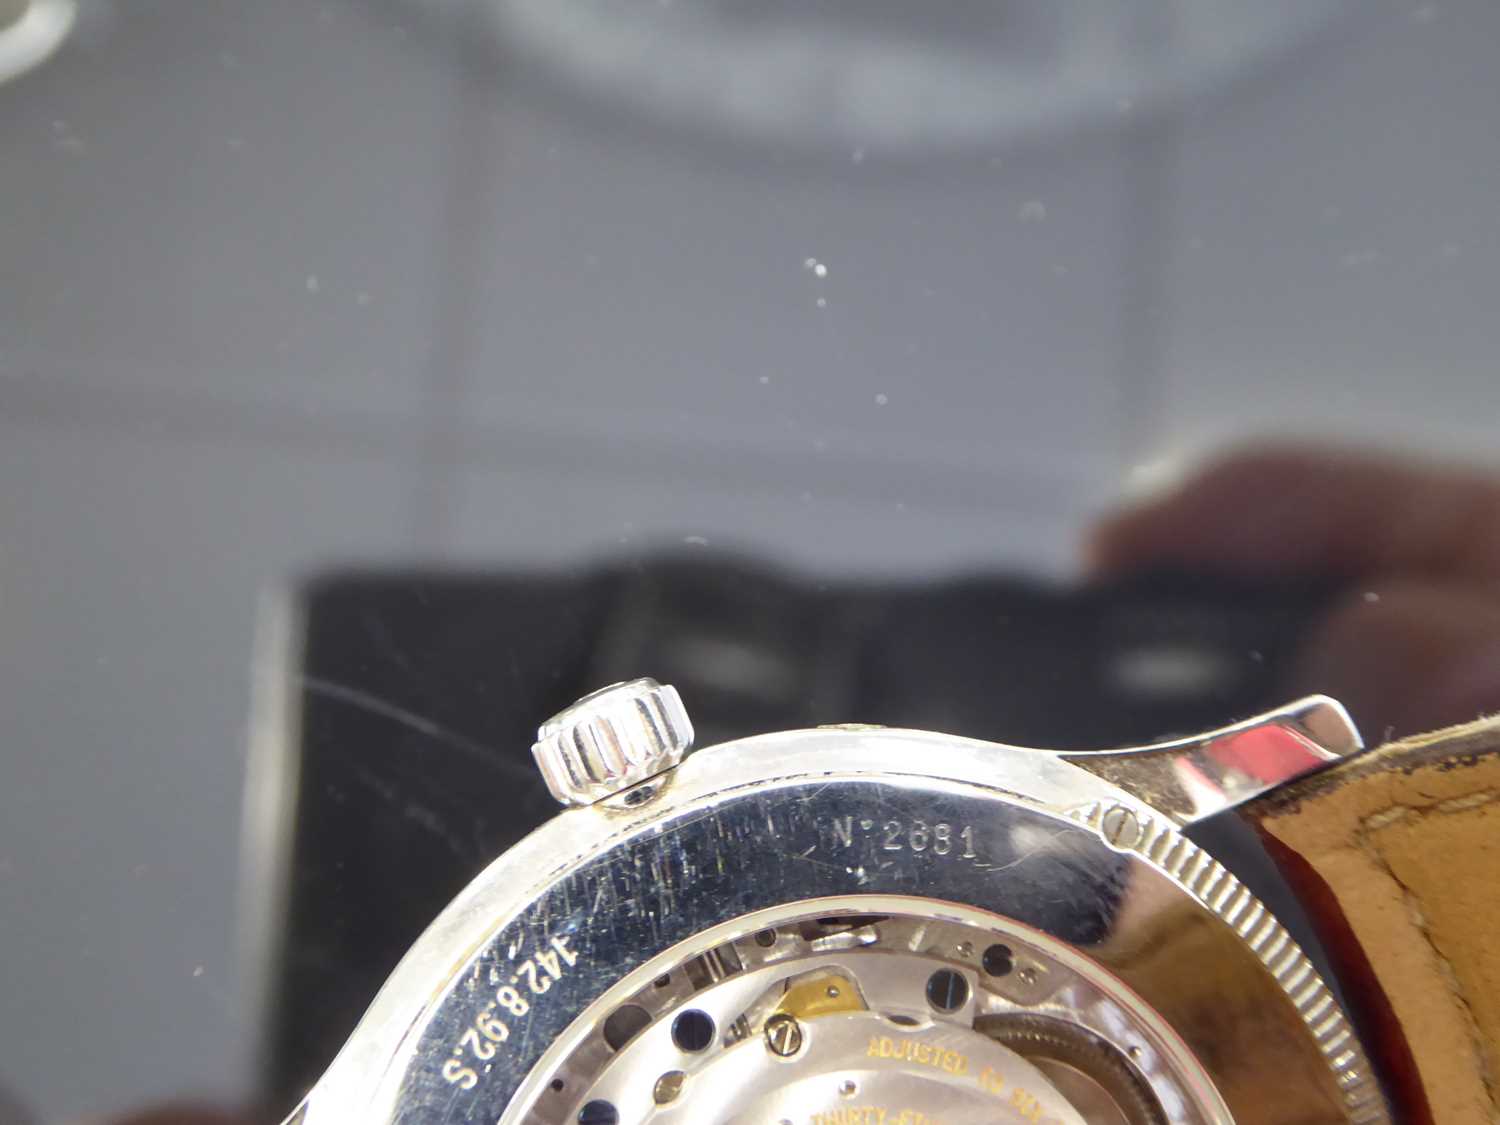 Jaeger LeCoultre: A World Dual Time Zone Automatic Power Reserve Day and Night Indication Wristwatch - Image 6 of 6